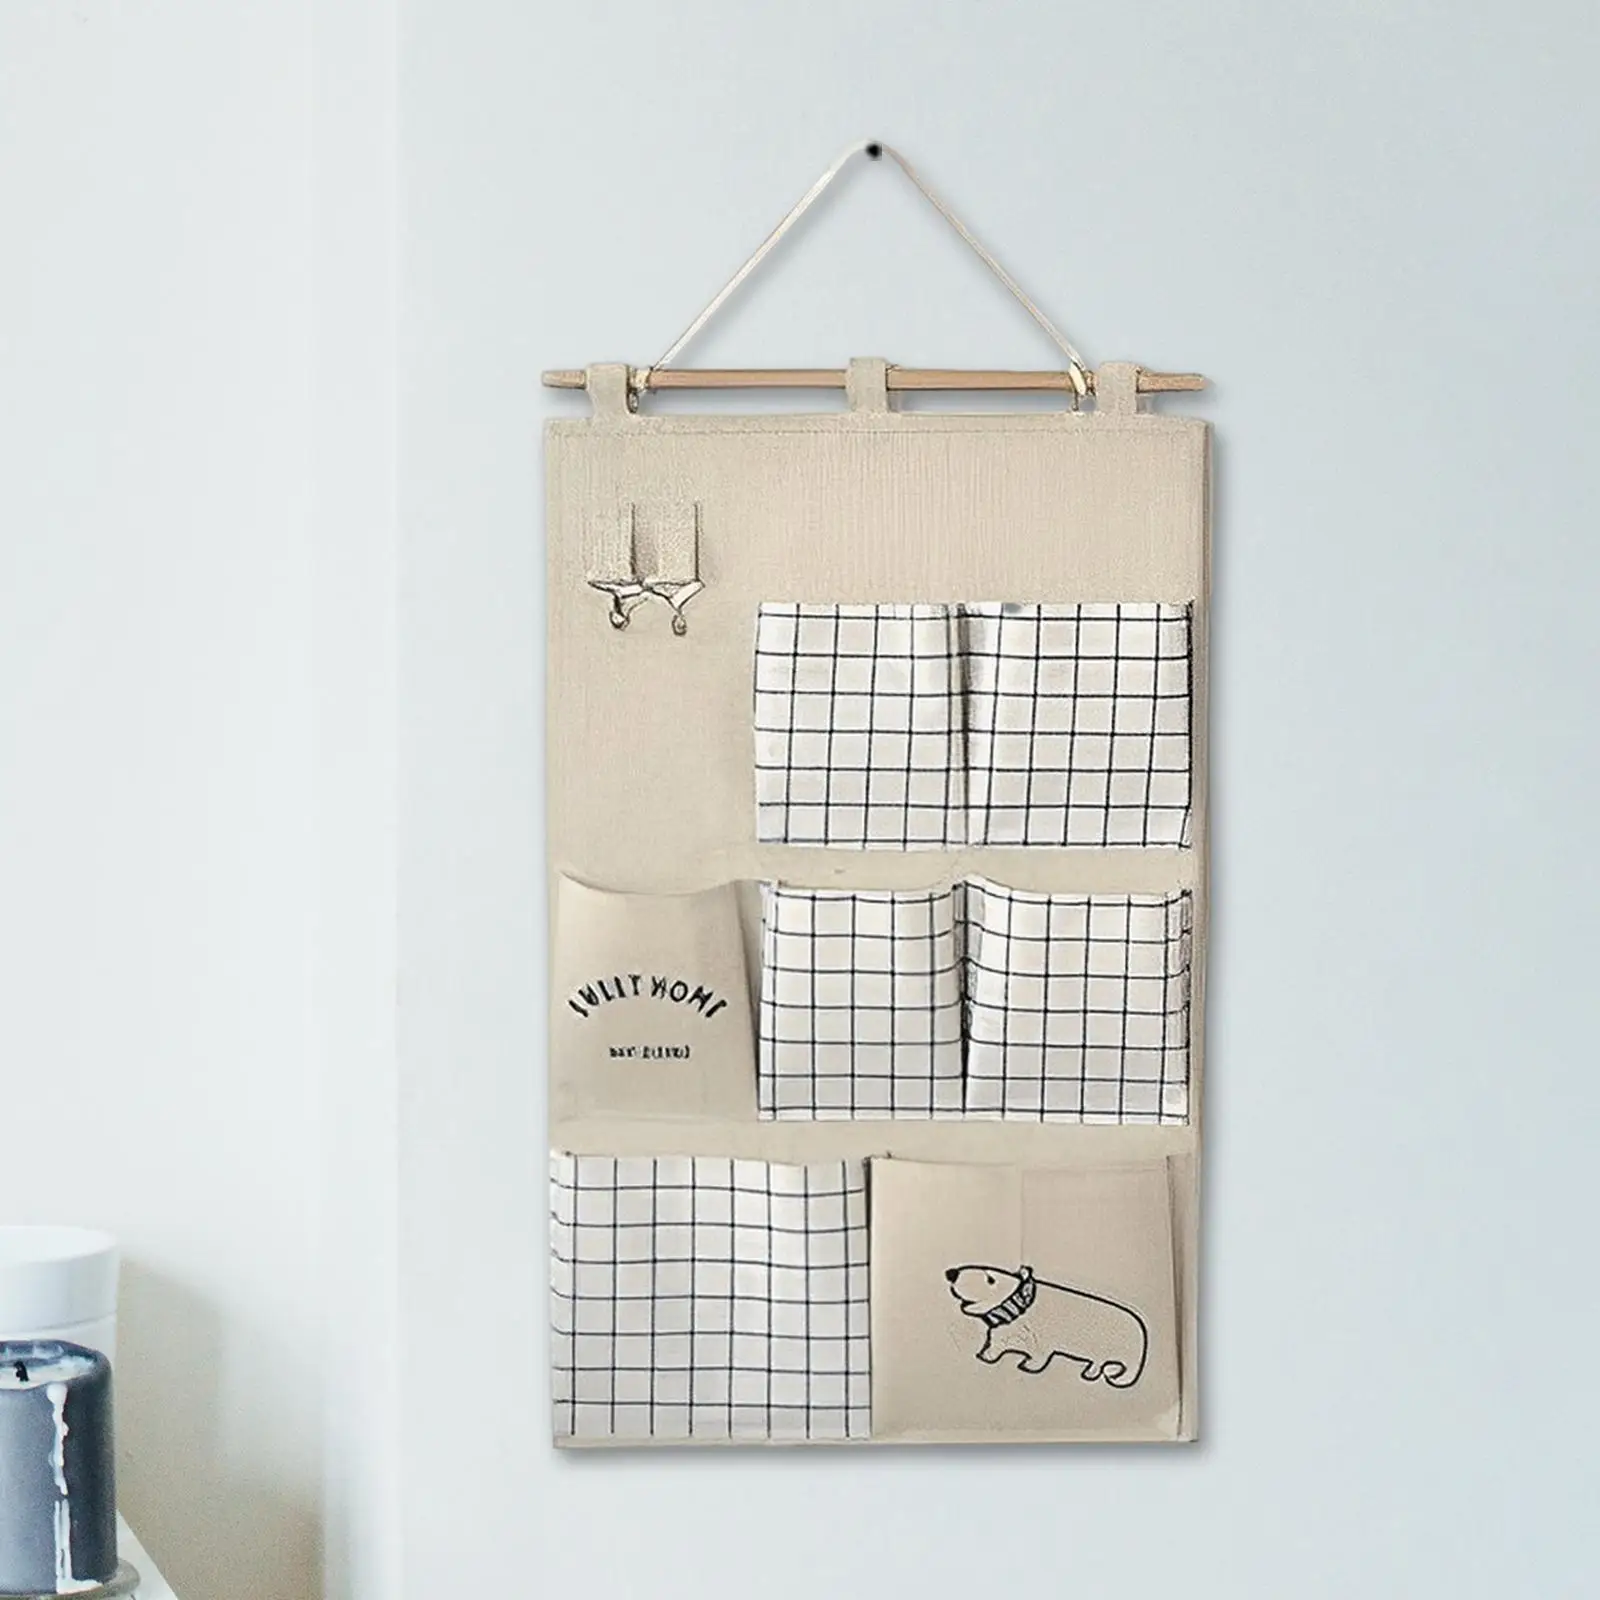 Wall Hanging Storage Bag Organizer Shelves Container Space Saving Wall Door